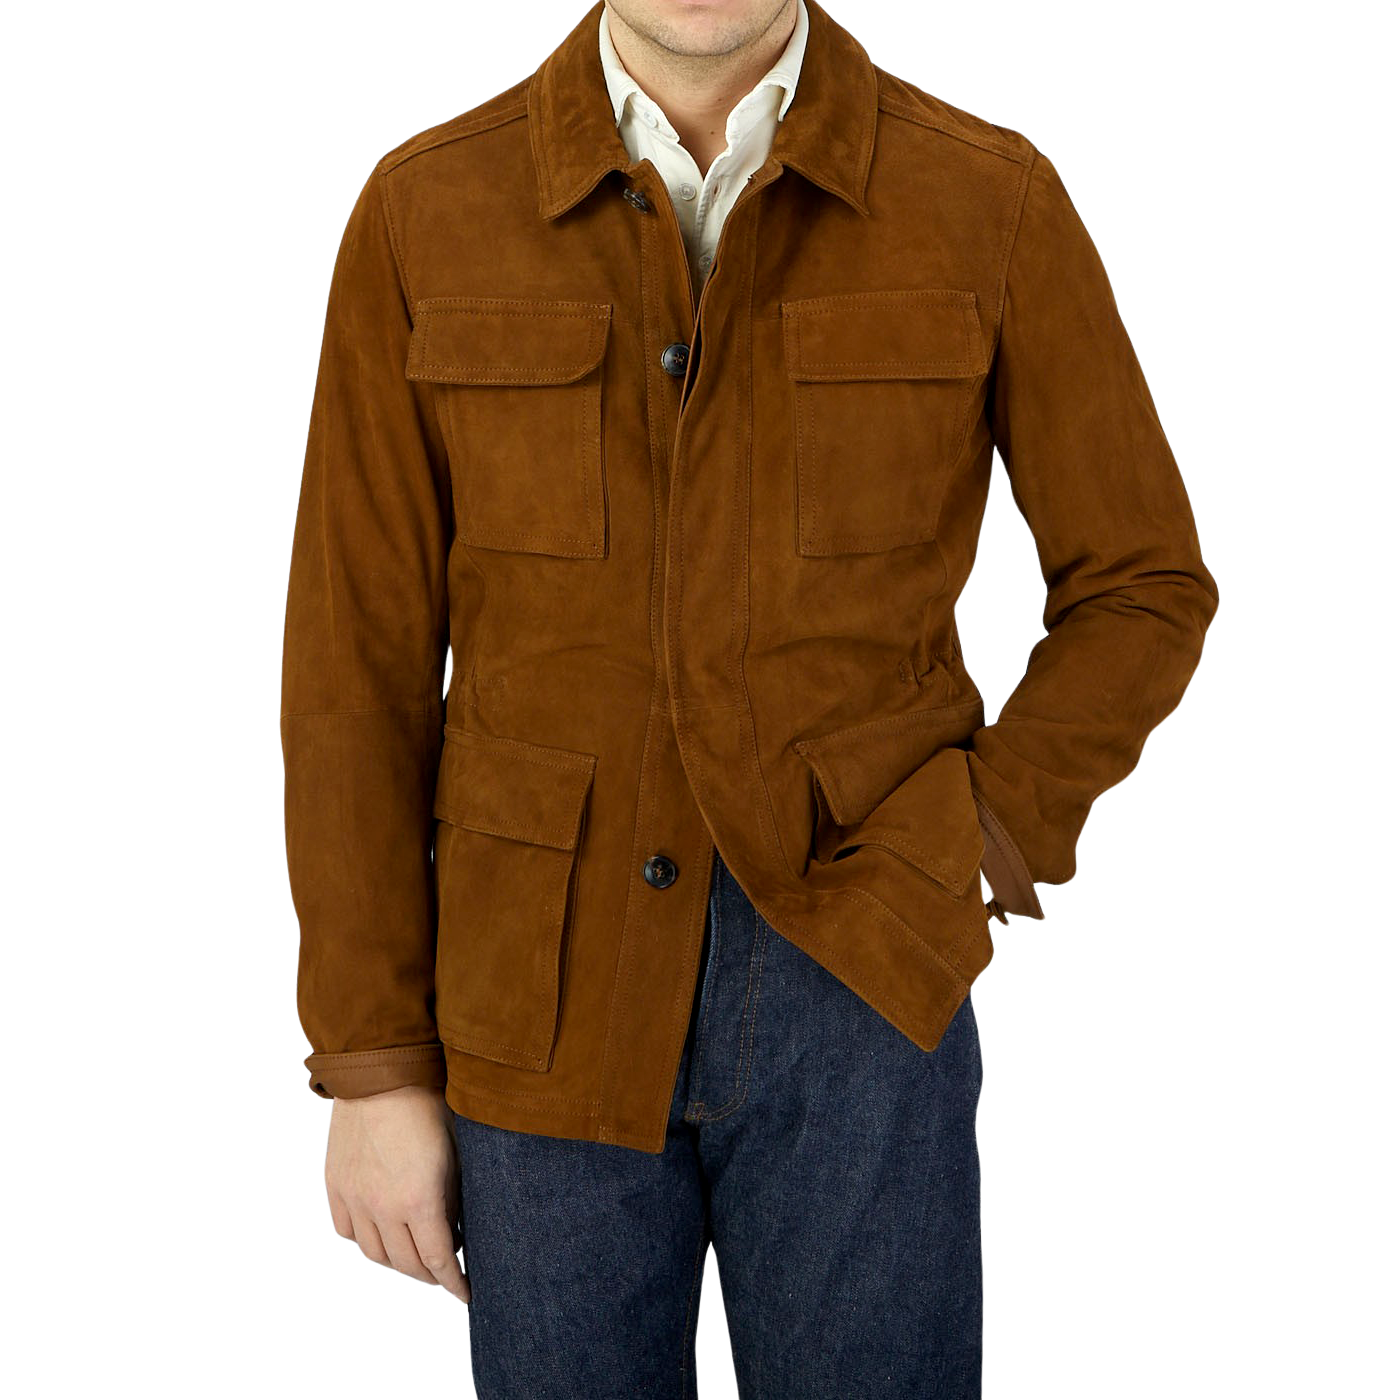 A man wearing a Sandalwood Suede Leather Anton jacket by Werner Christ.